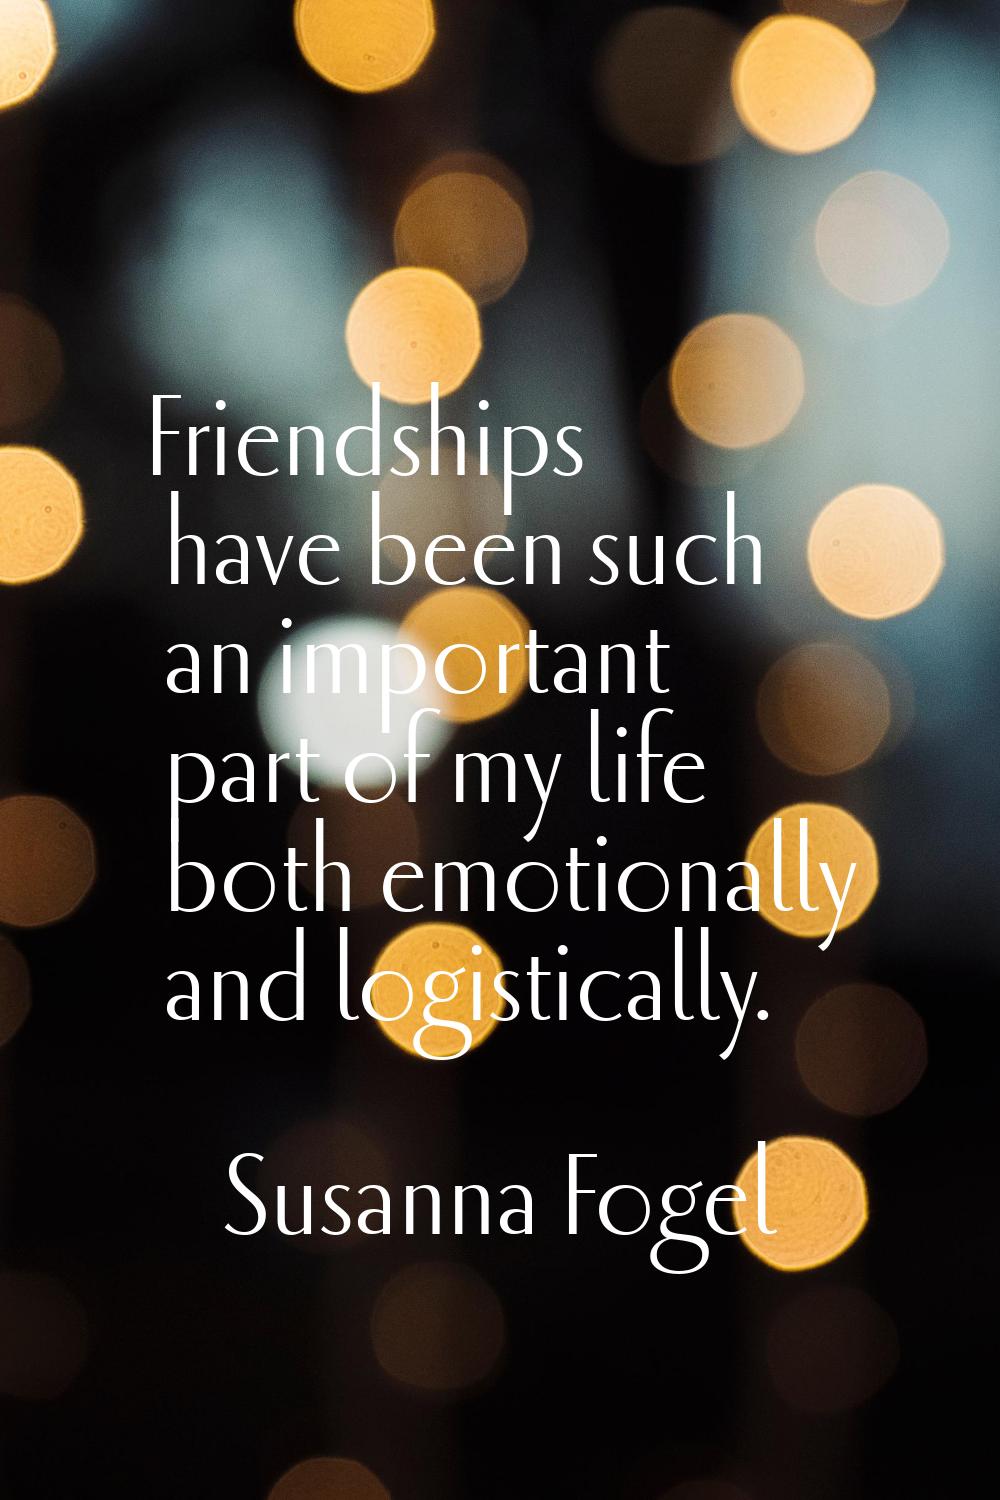 Friendships have been such an important part of my life both emotionally and logistically.